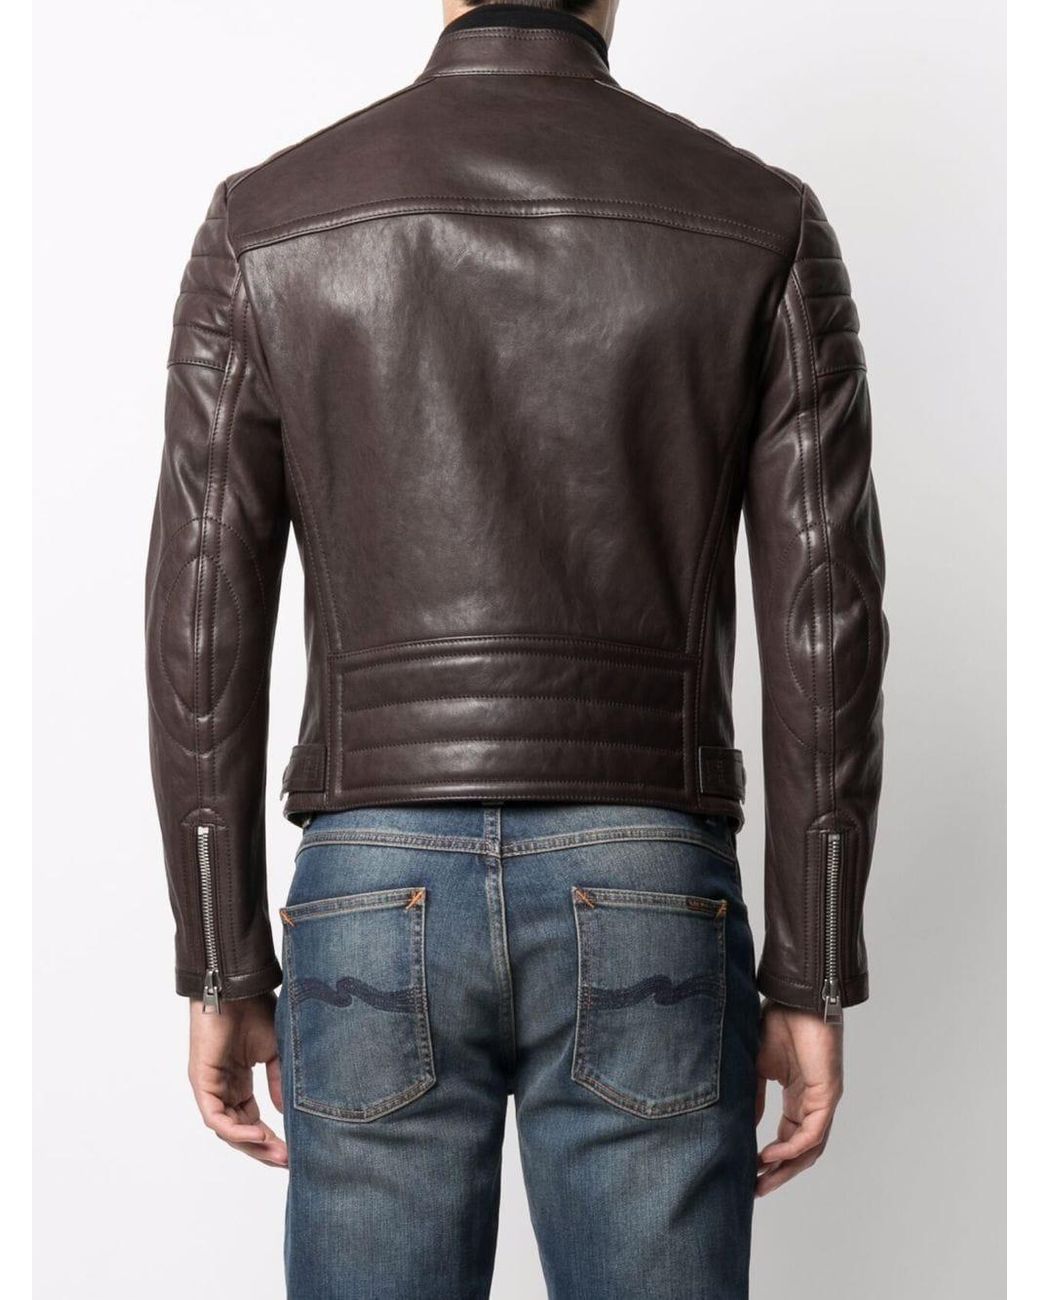 Total 101+ imagen tom ford leather jacket brown - Abzlocal.mx